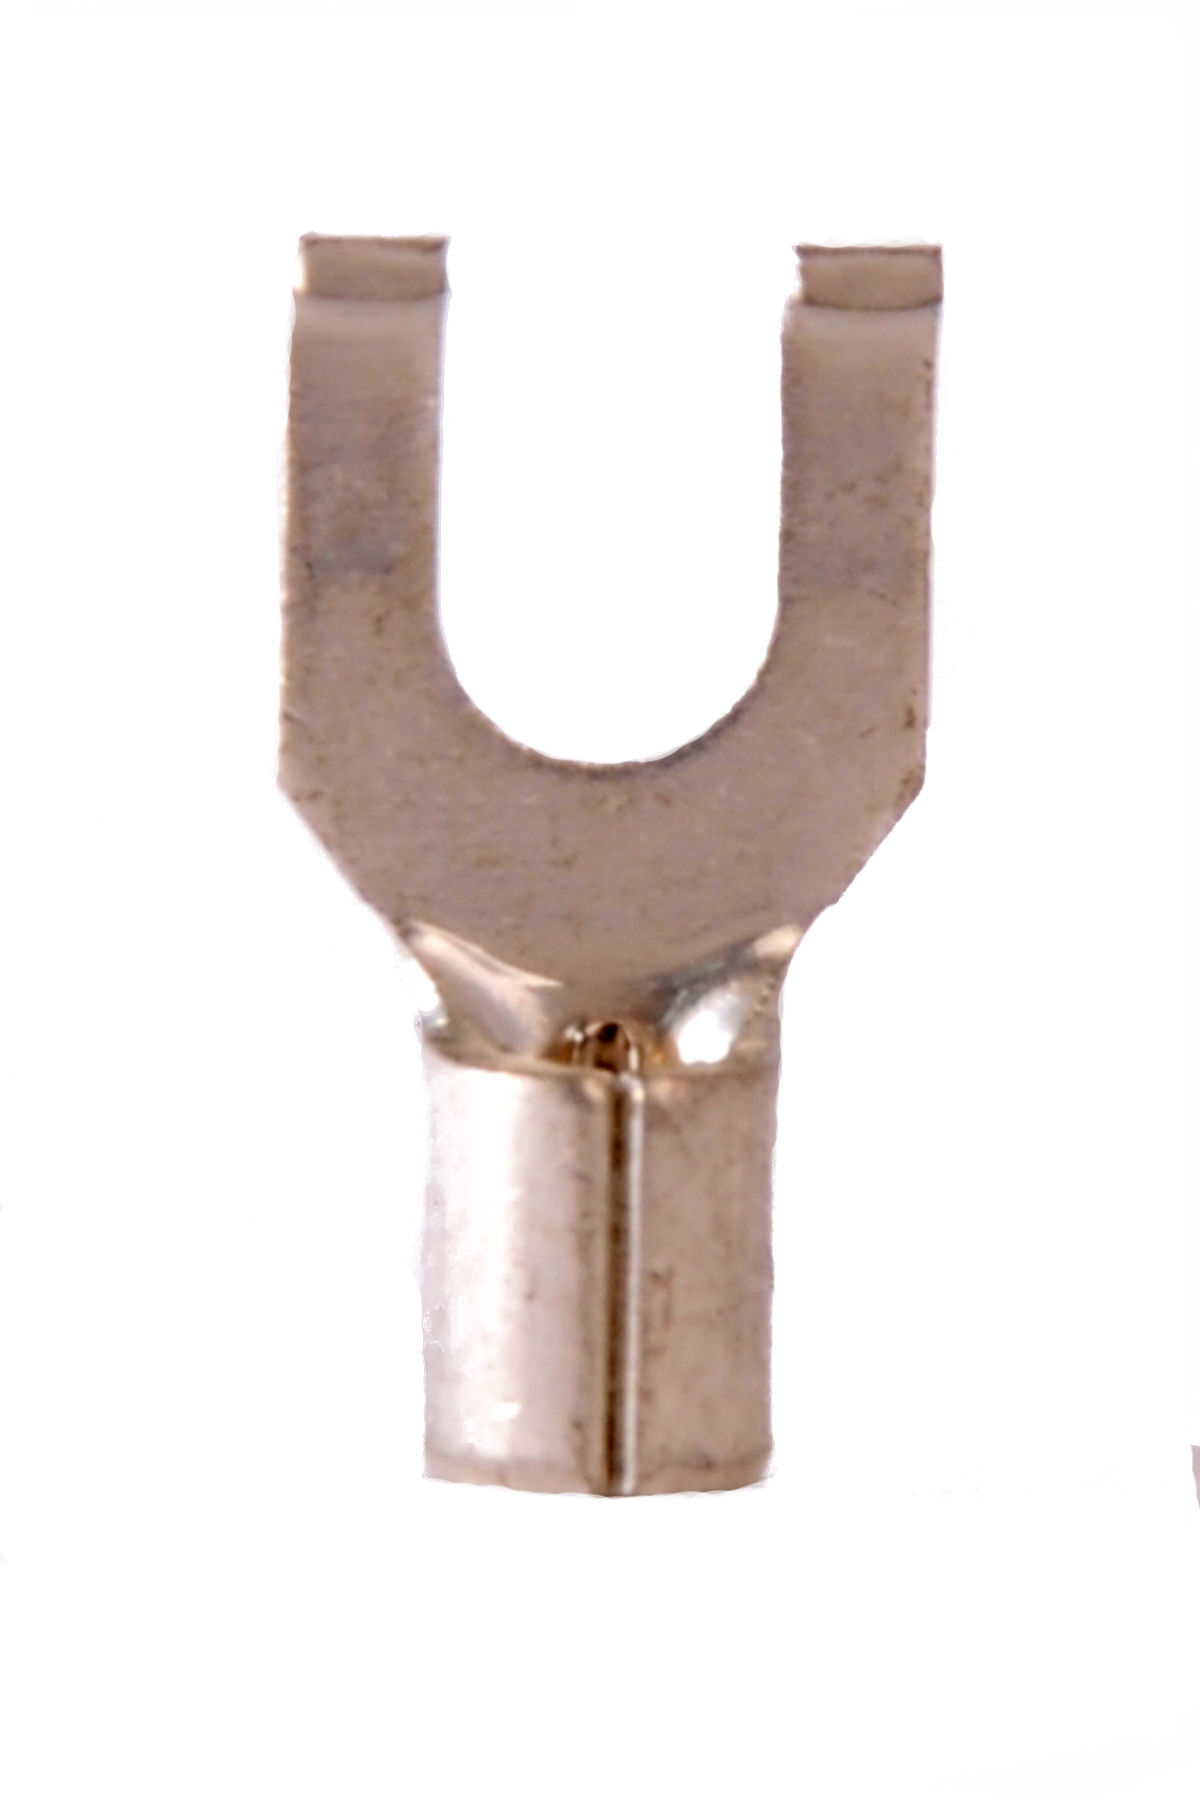 16-14 Non Insulated #6 Flanged Spade